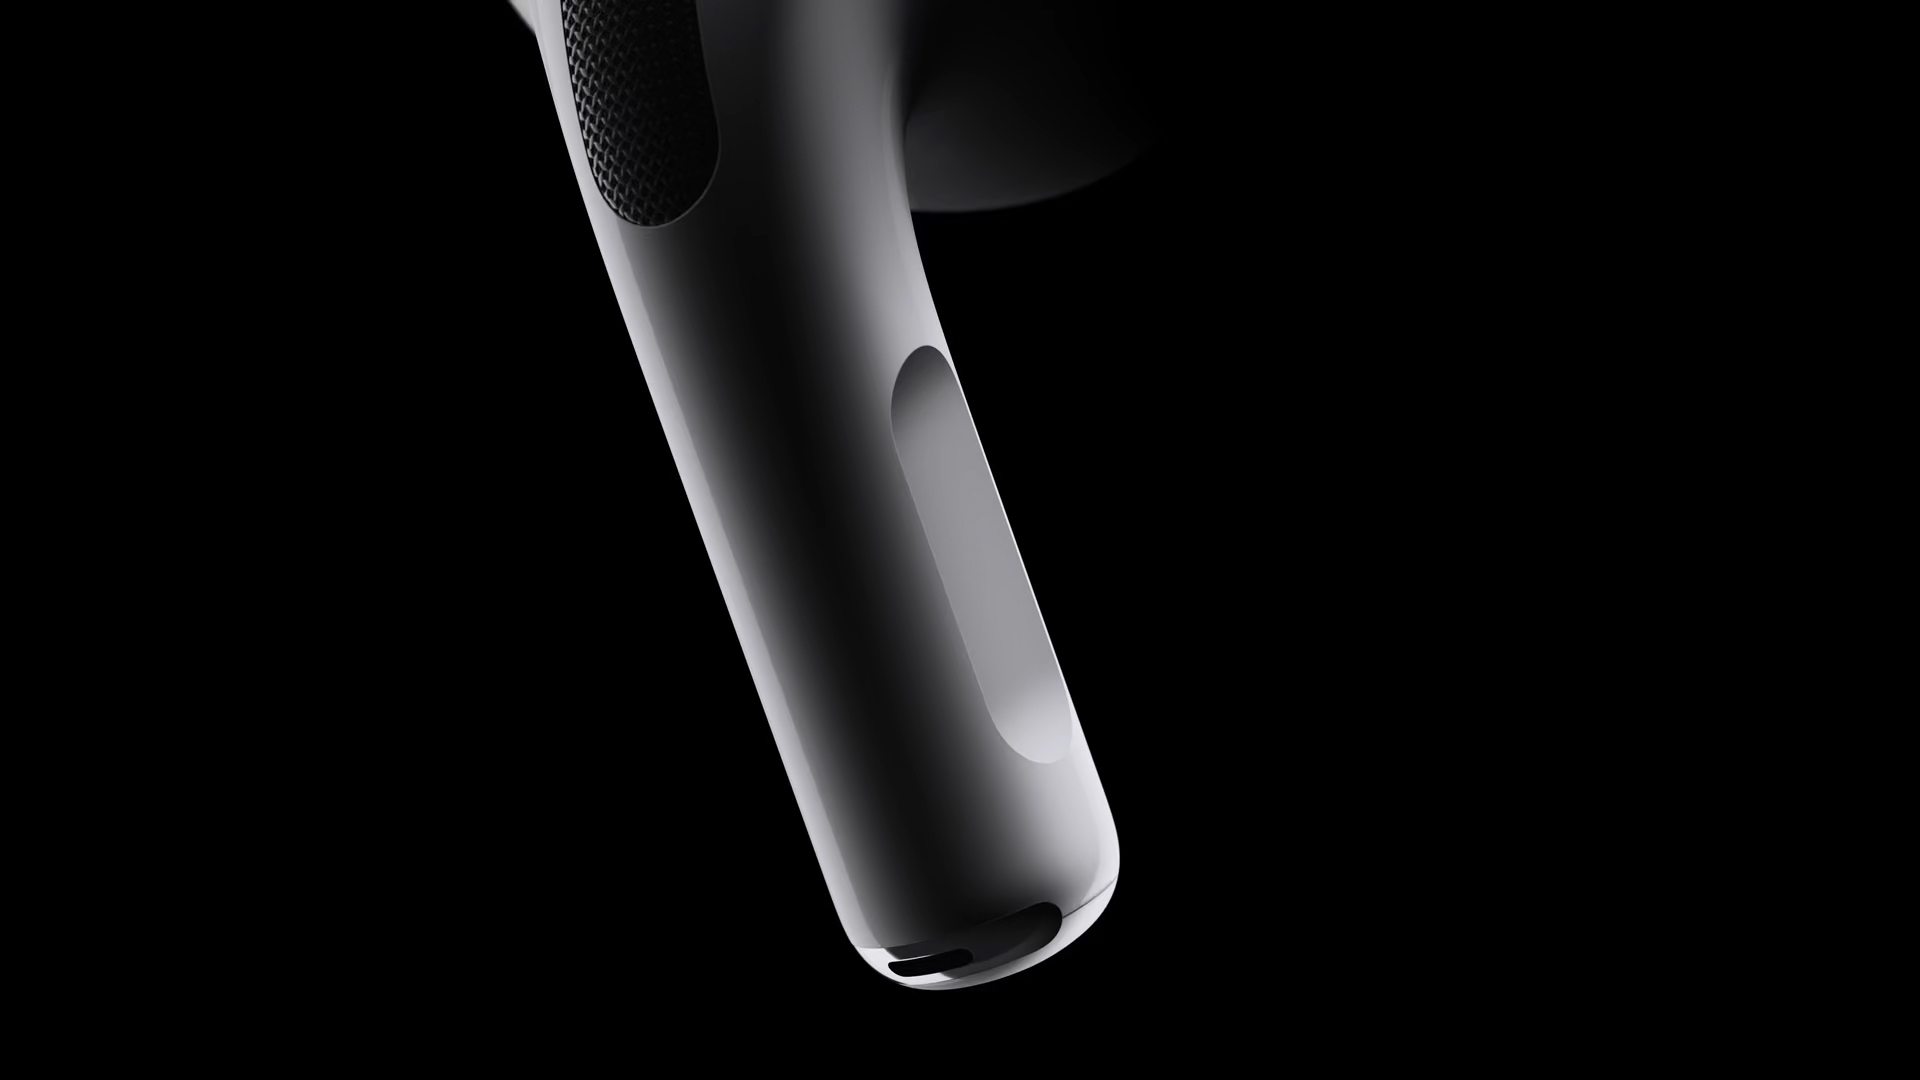 Closeup of an AirPod stem with a touch surface for adjusting the volume